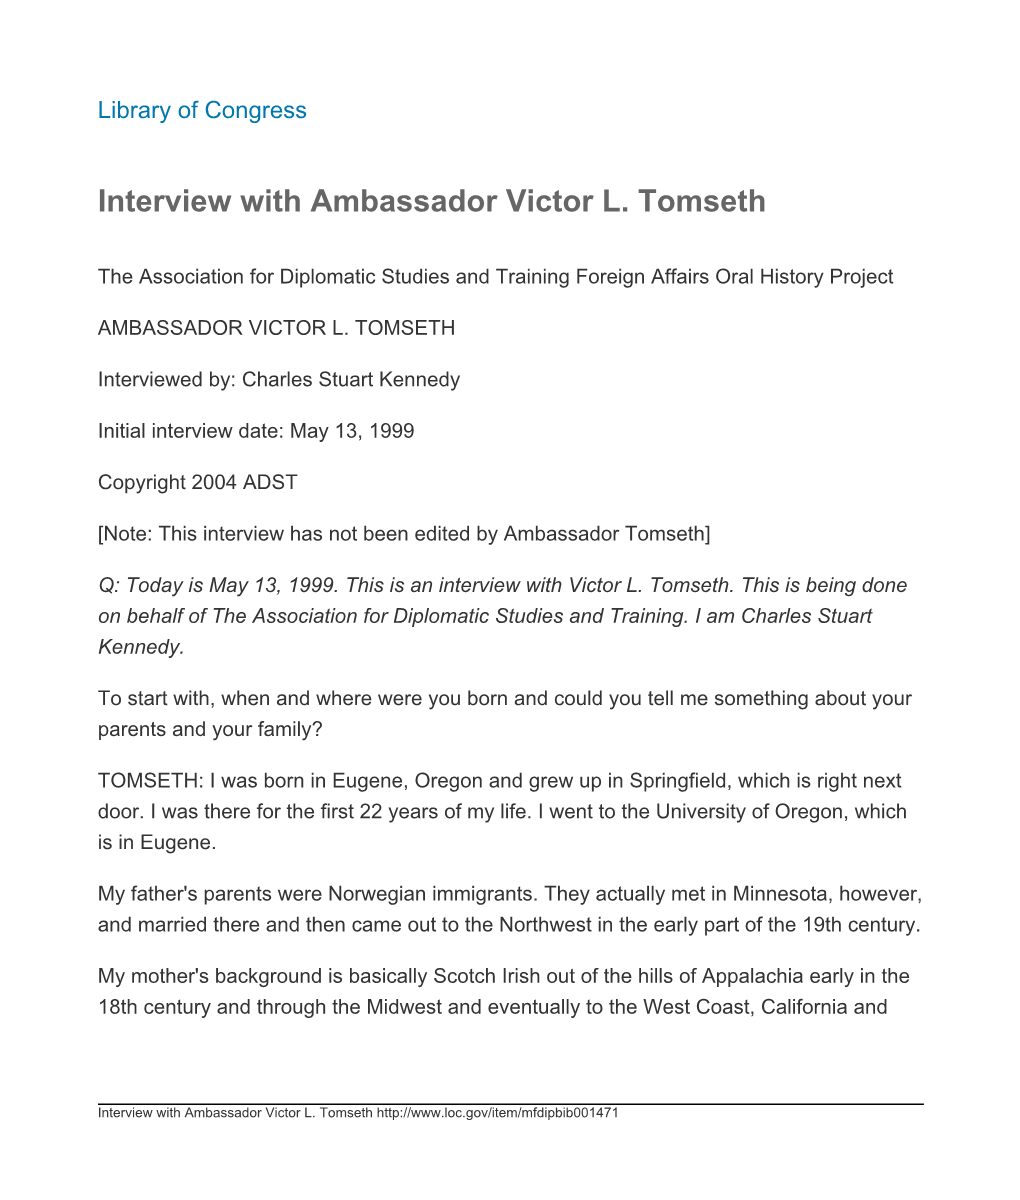 Interview with Ambassador Victor L. Tomseth